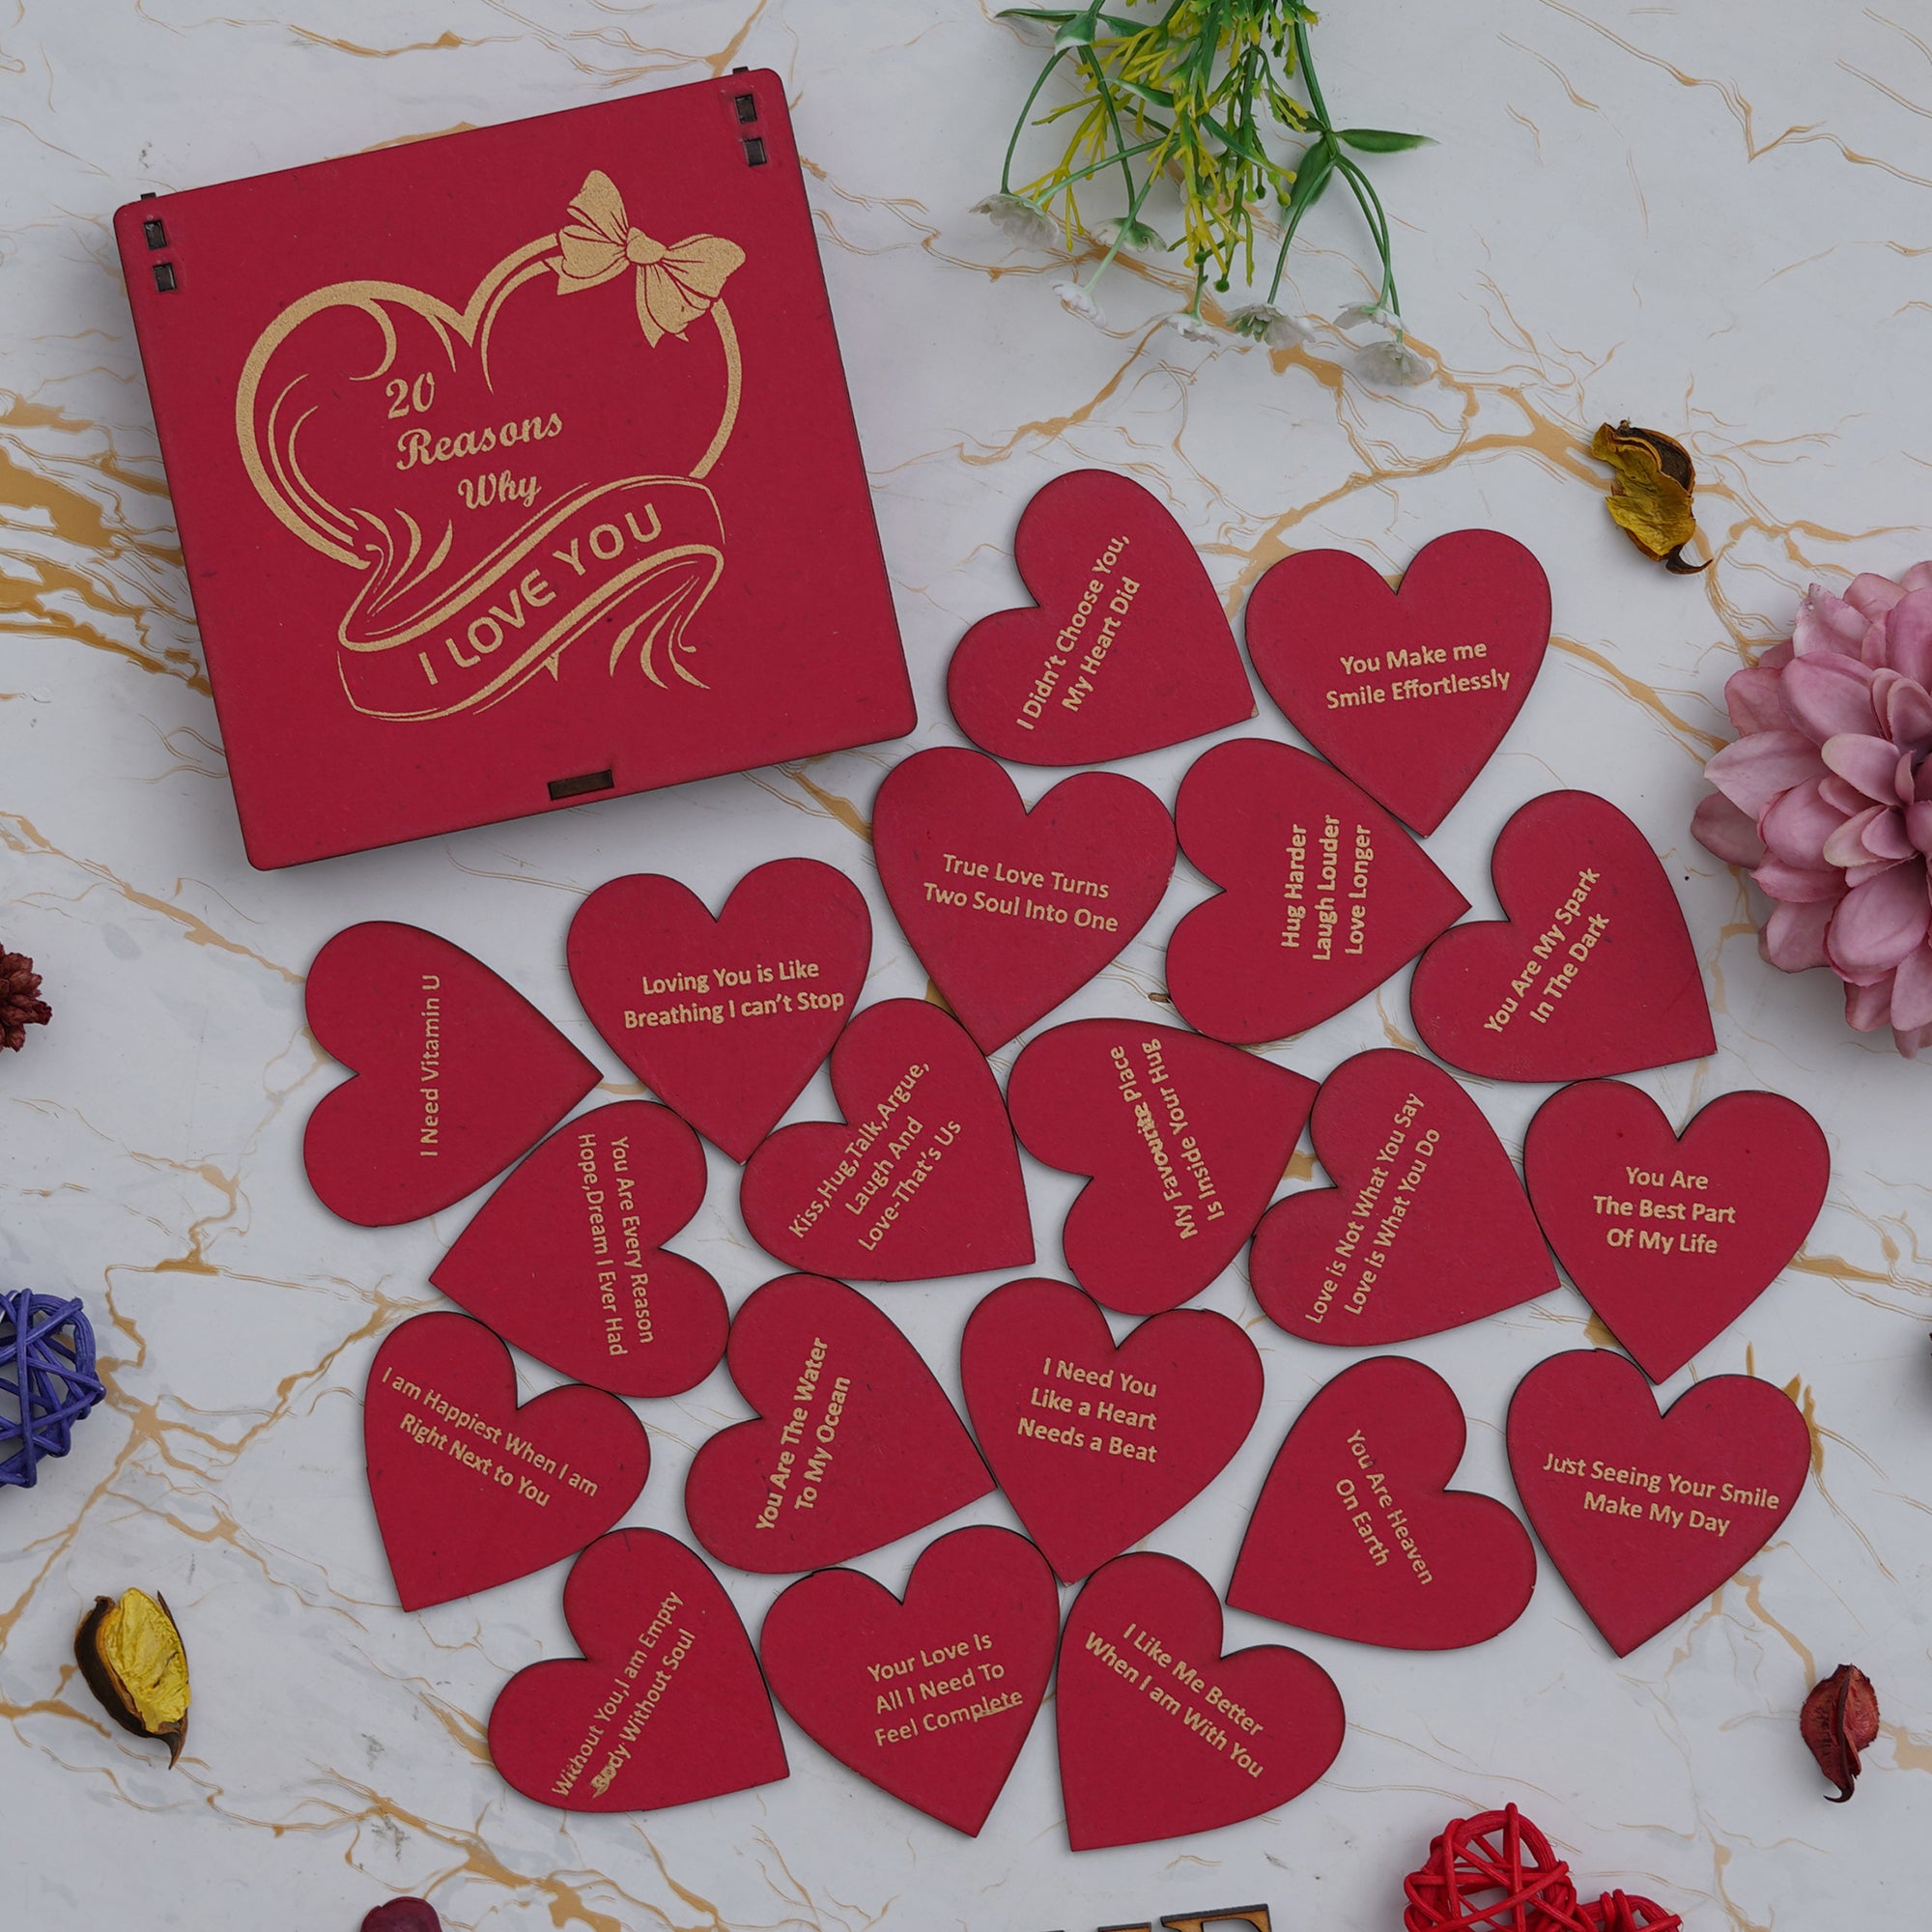 "20 Reasons Why I Love You" Printed on Little Red Hearts Decorative Valentine Wooden Gift Set Box 3